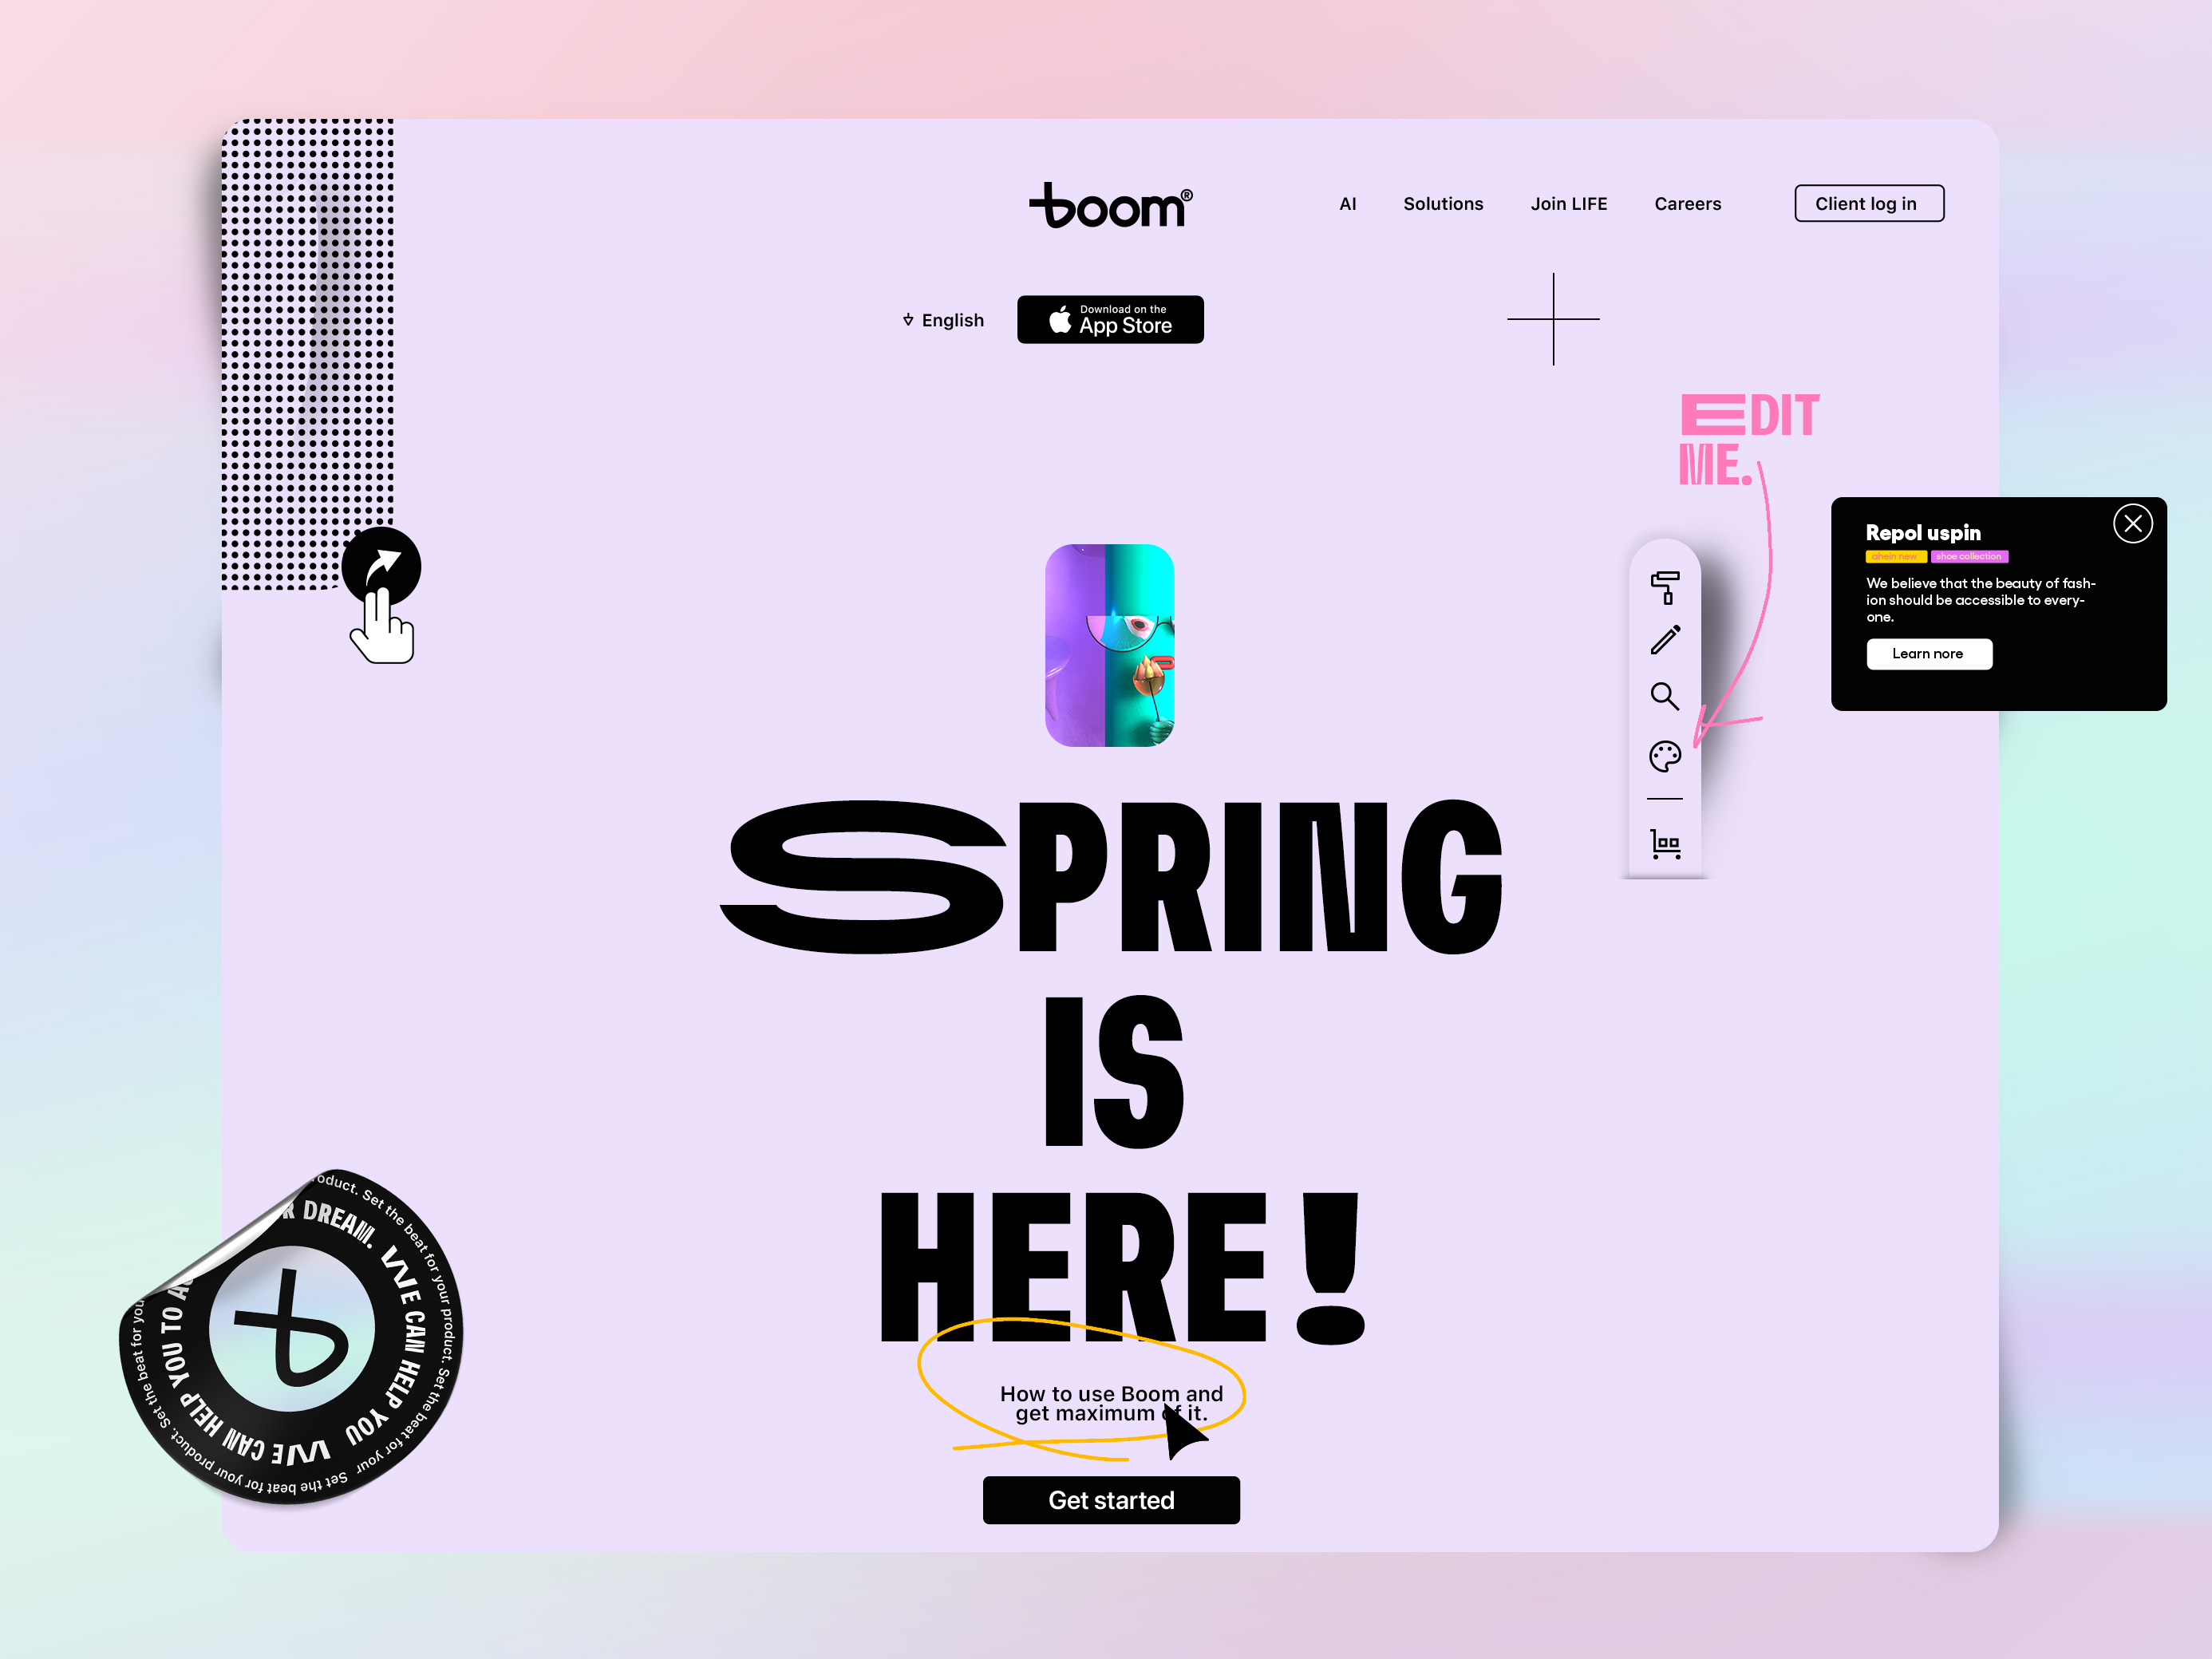 The work was performed for Boom and showcase some of the new identity elements and patterns that form a design system.